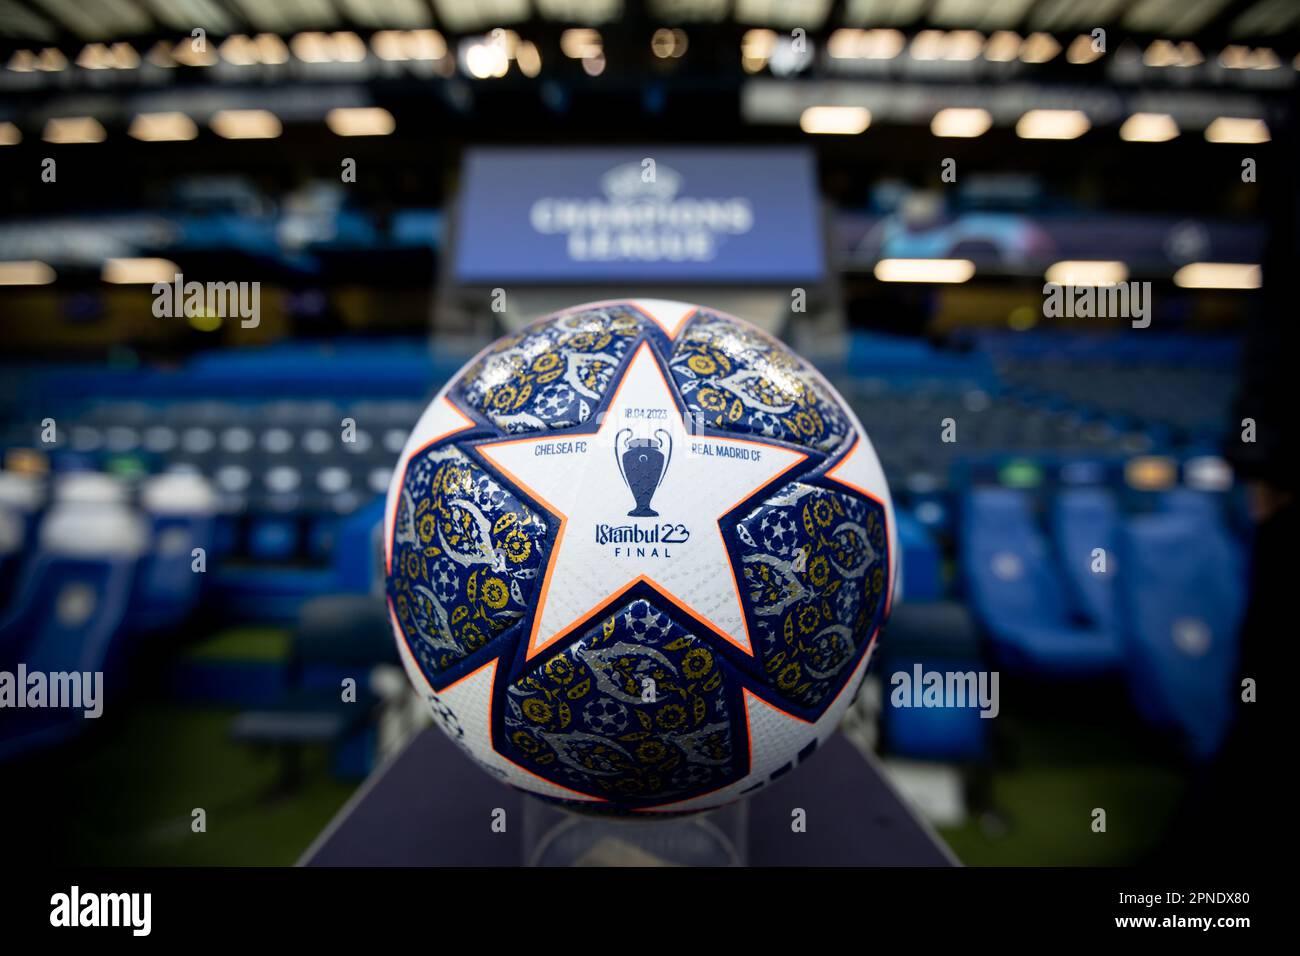 Official ball of the Uefa Champions League pictured during the UEFA Champions League Quarter Final match between Chelsea and Real Madrid at Stamford Bridge, London on Tuesday 18th April 2023